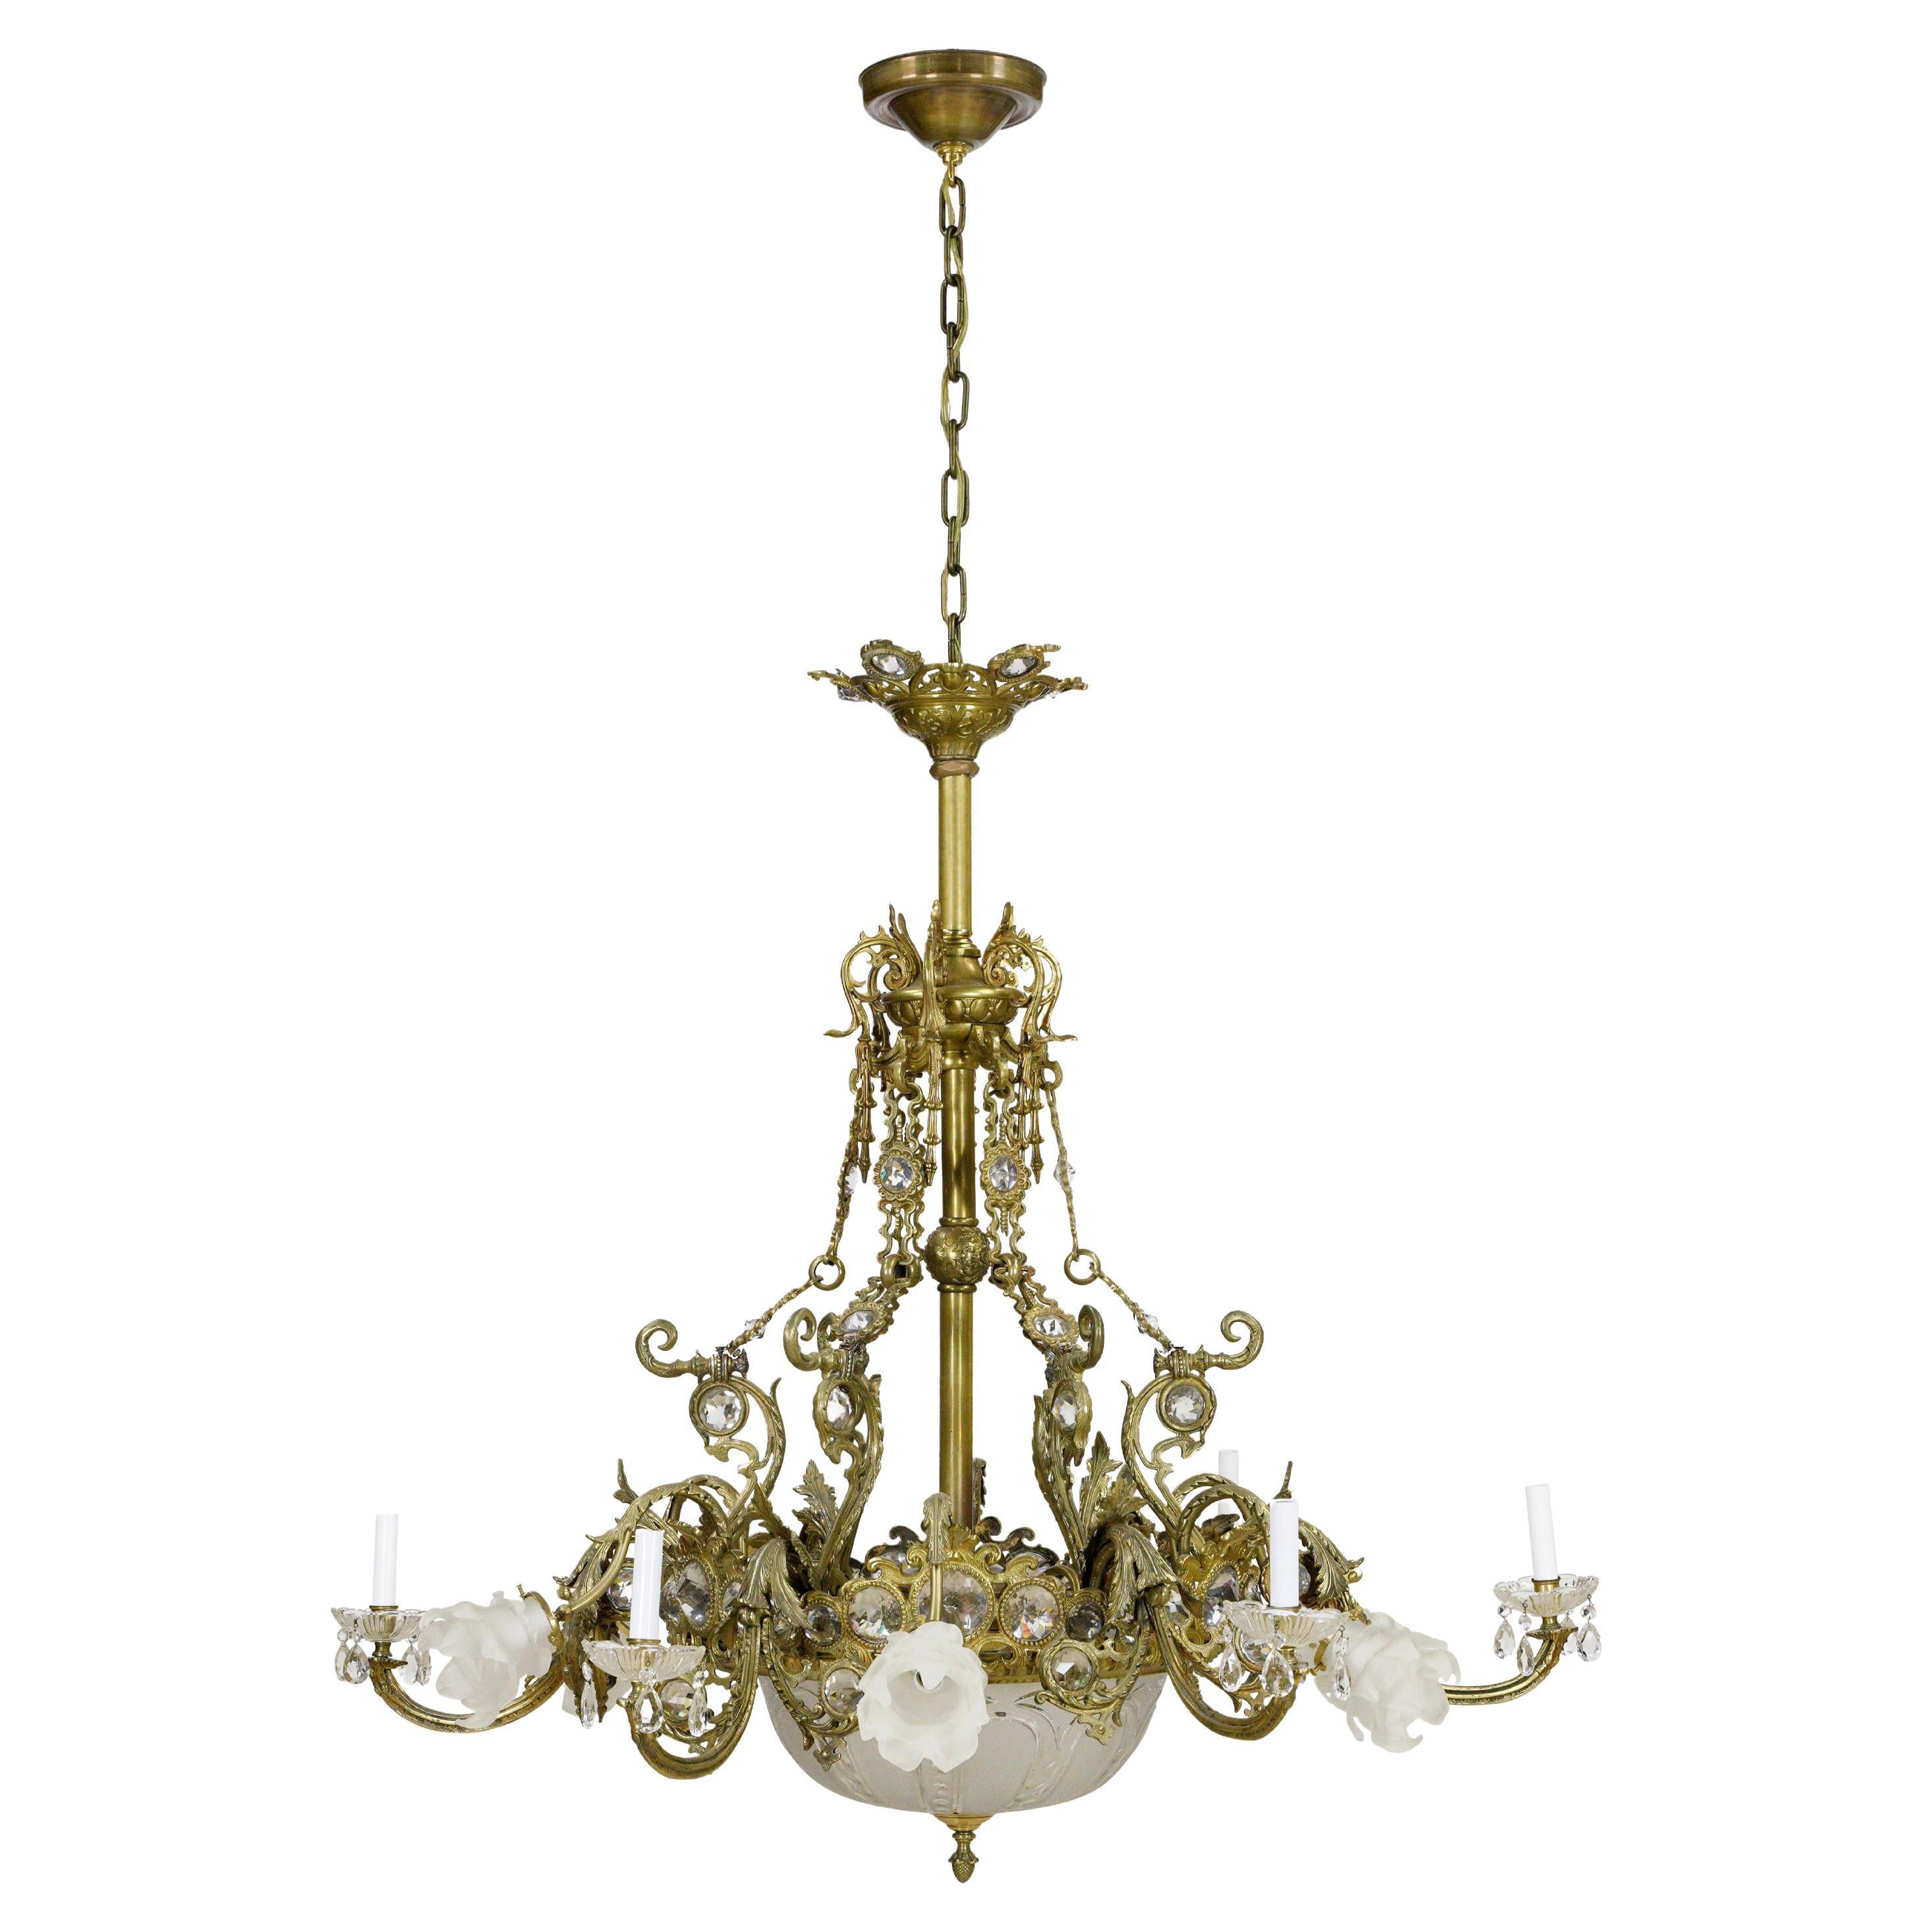 Antique French 12 Arm 15 Light Bronze & Glass Chandelier For Sale